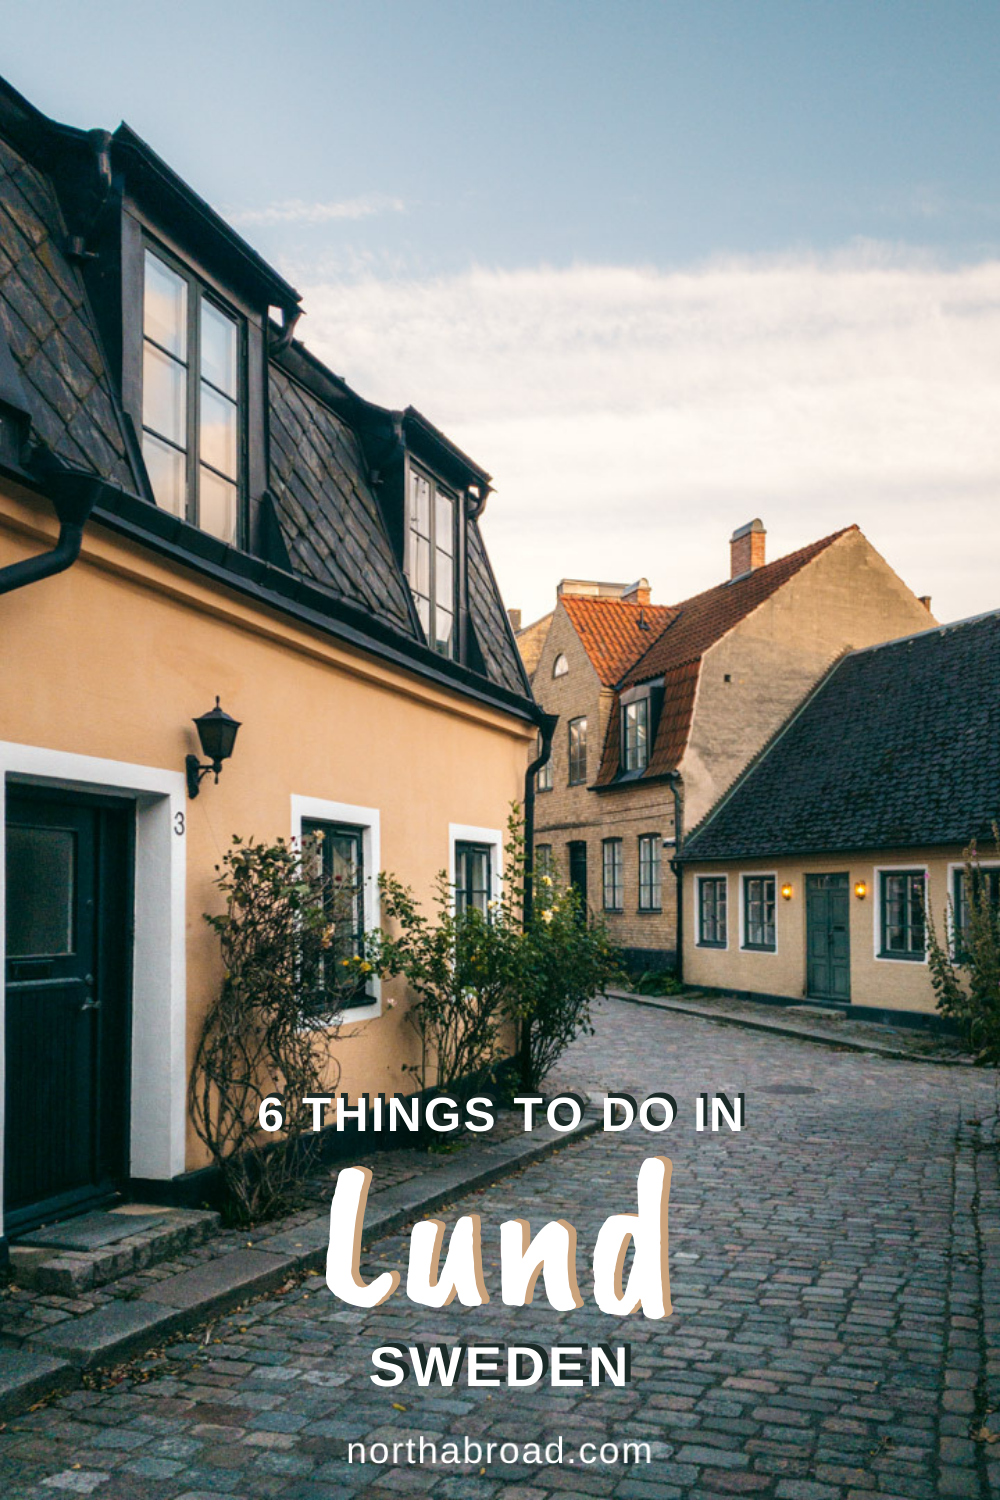 Amazing things to do in Lund, Sweden